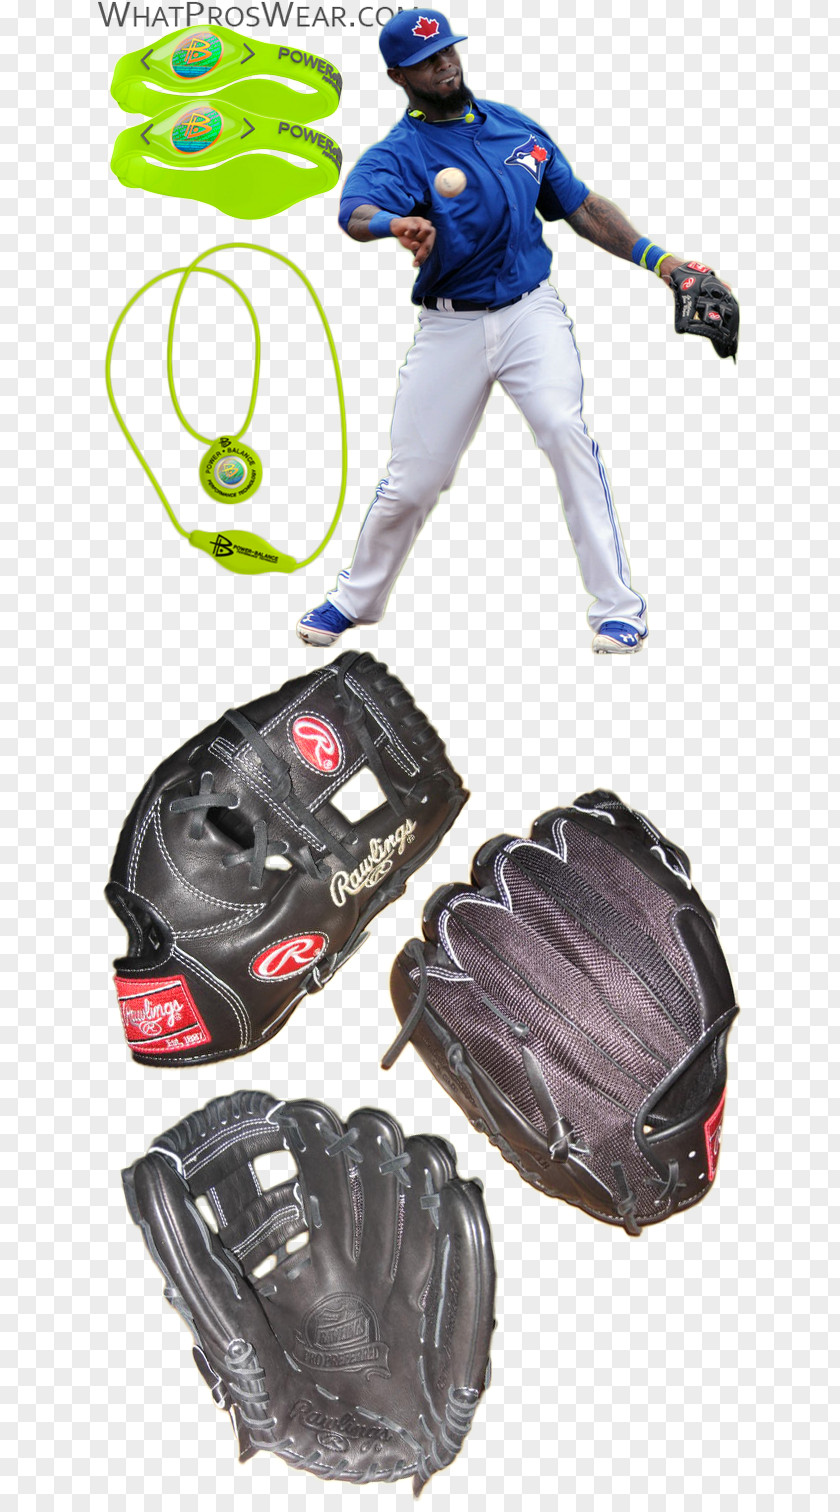 Baseball Protective Gear In Sports Clothing Glove Sleeve PNG